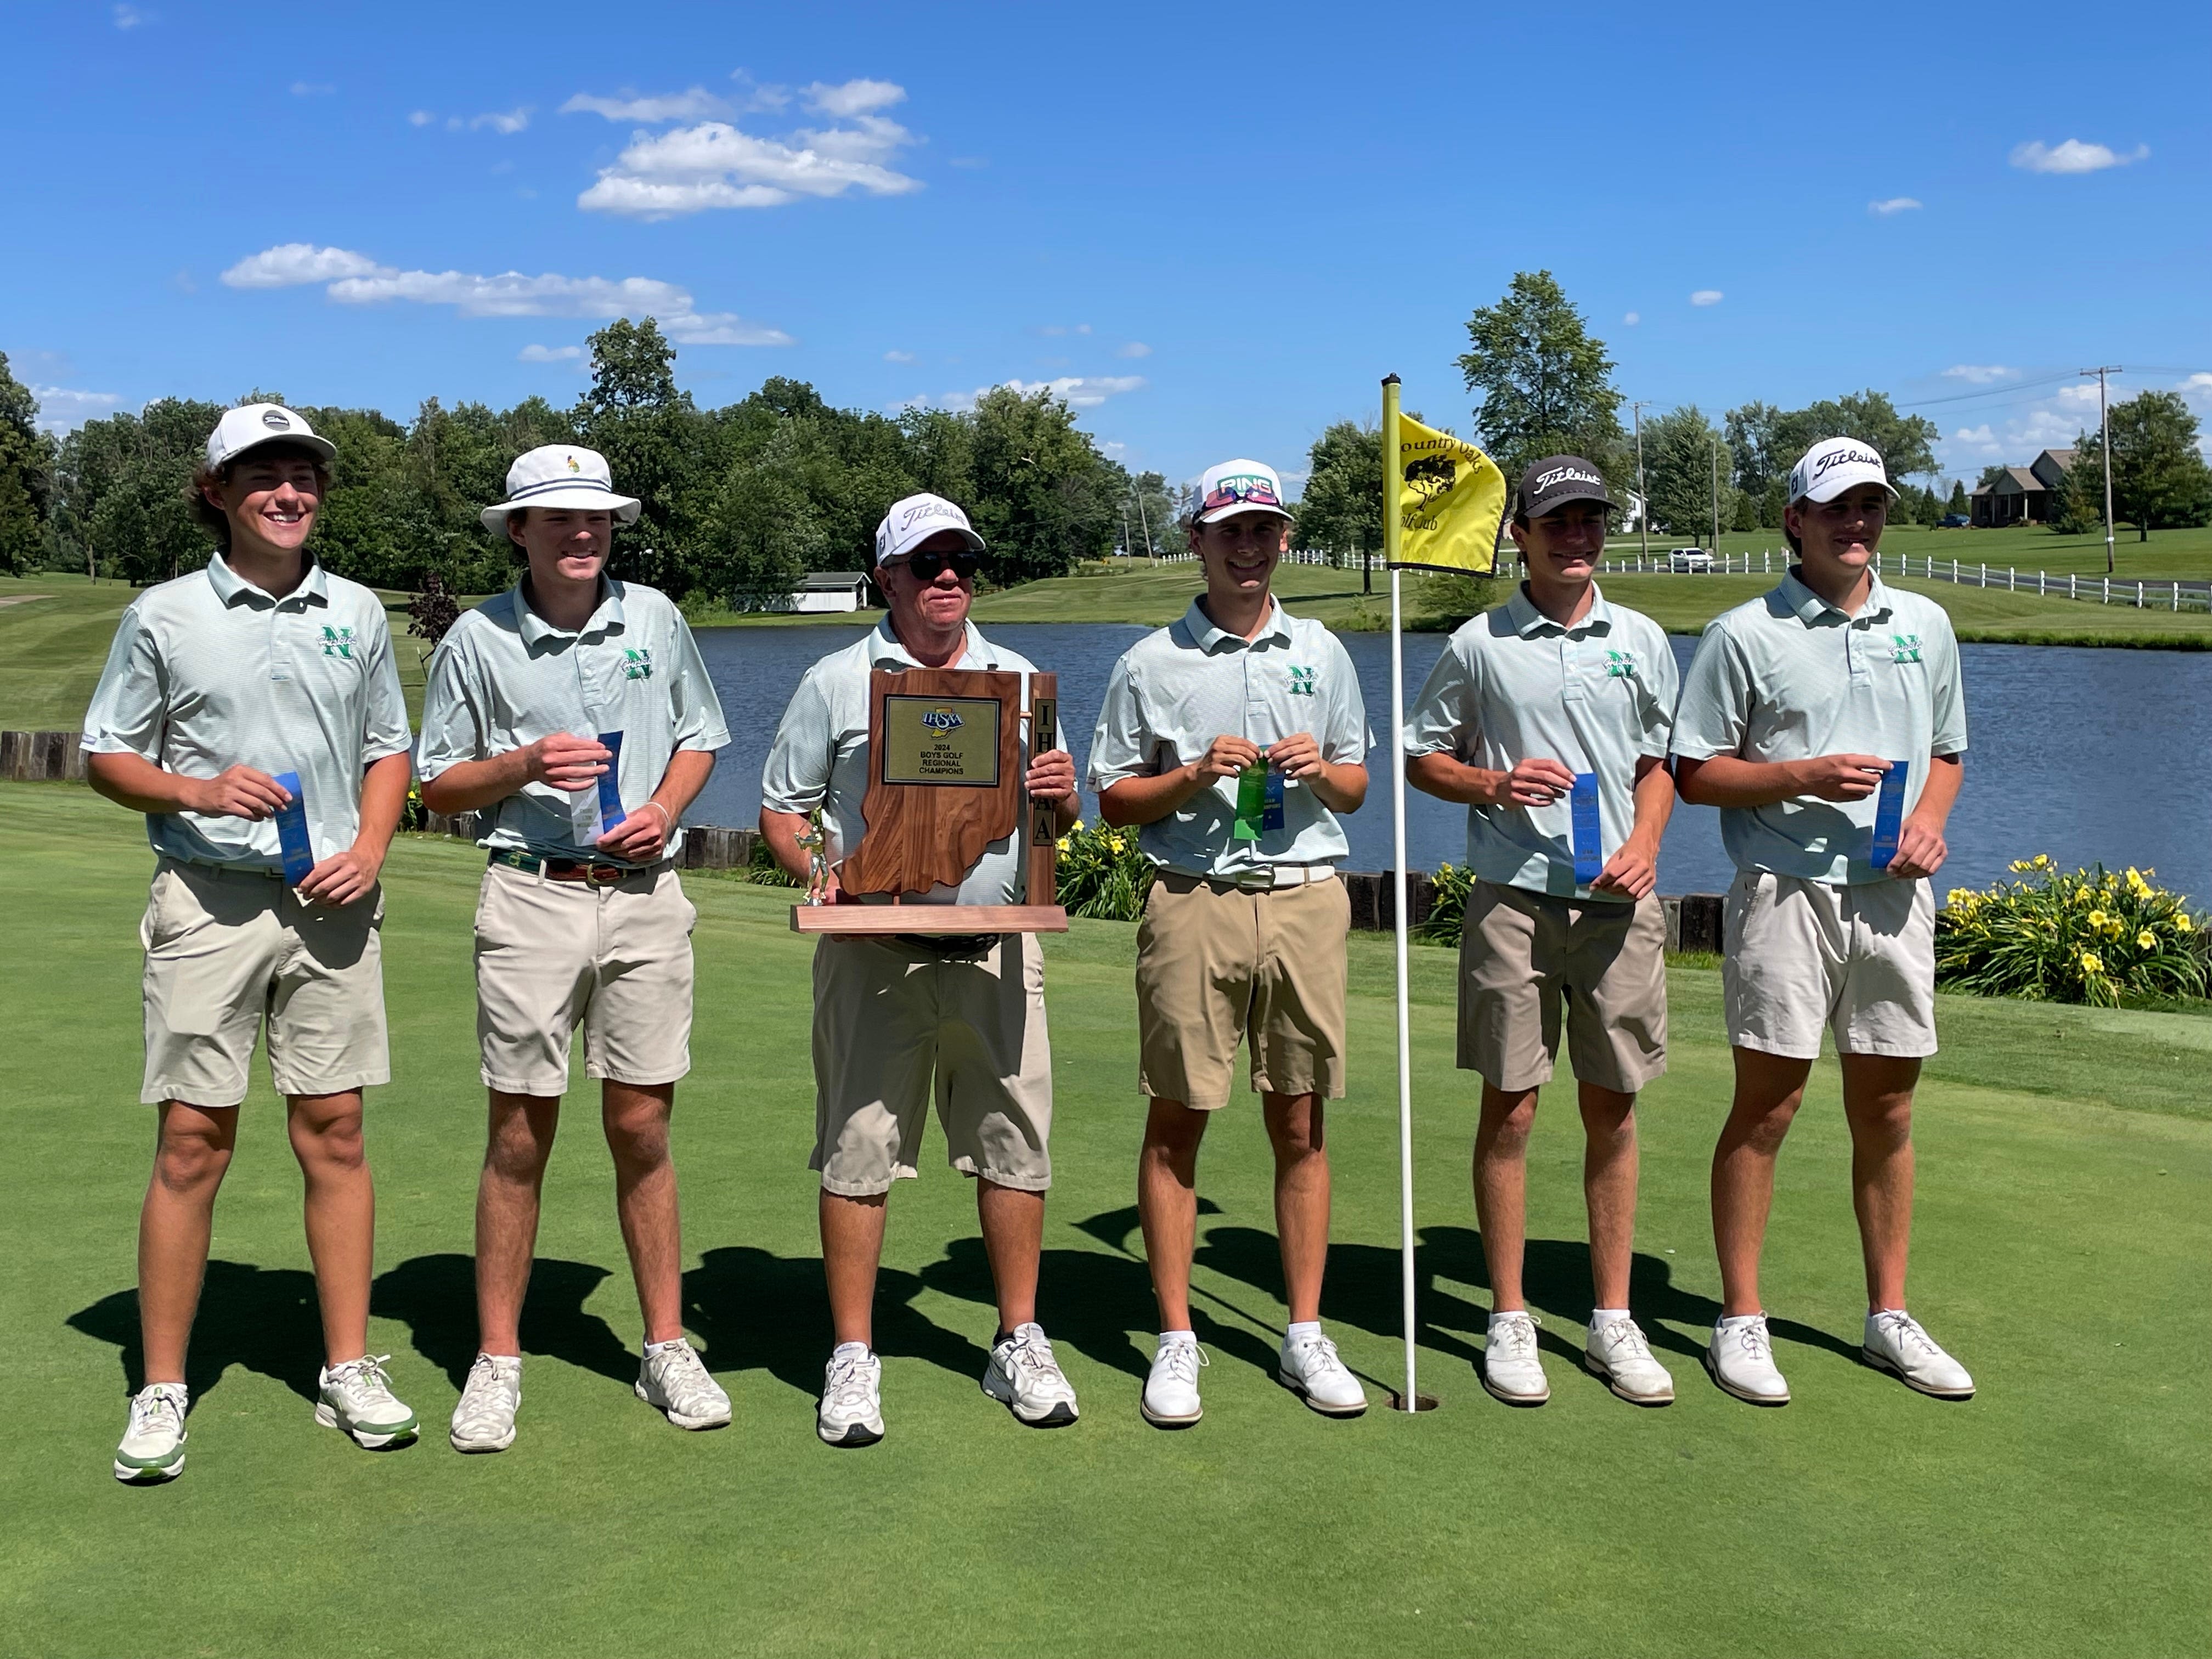 North boys golf rises to the occasion to win another IHSAA regional championship